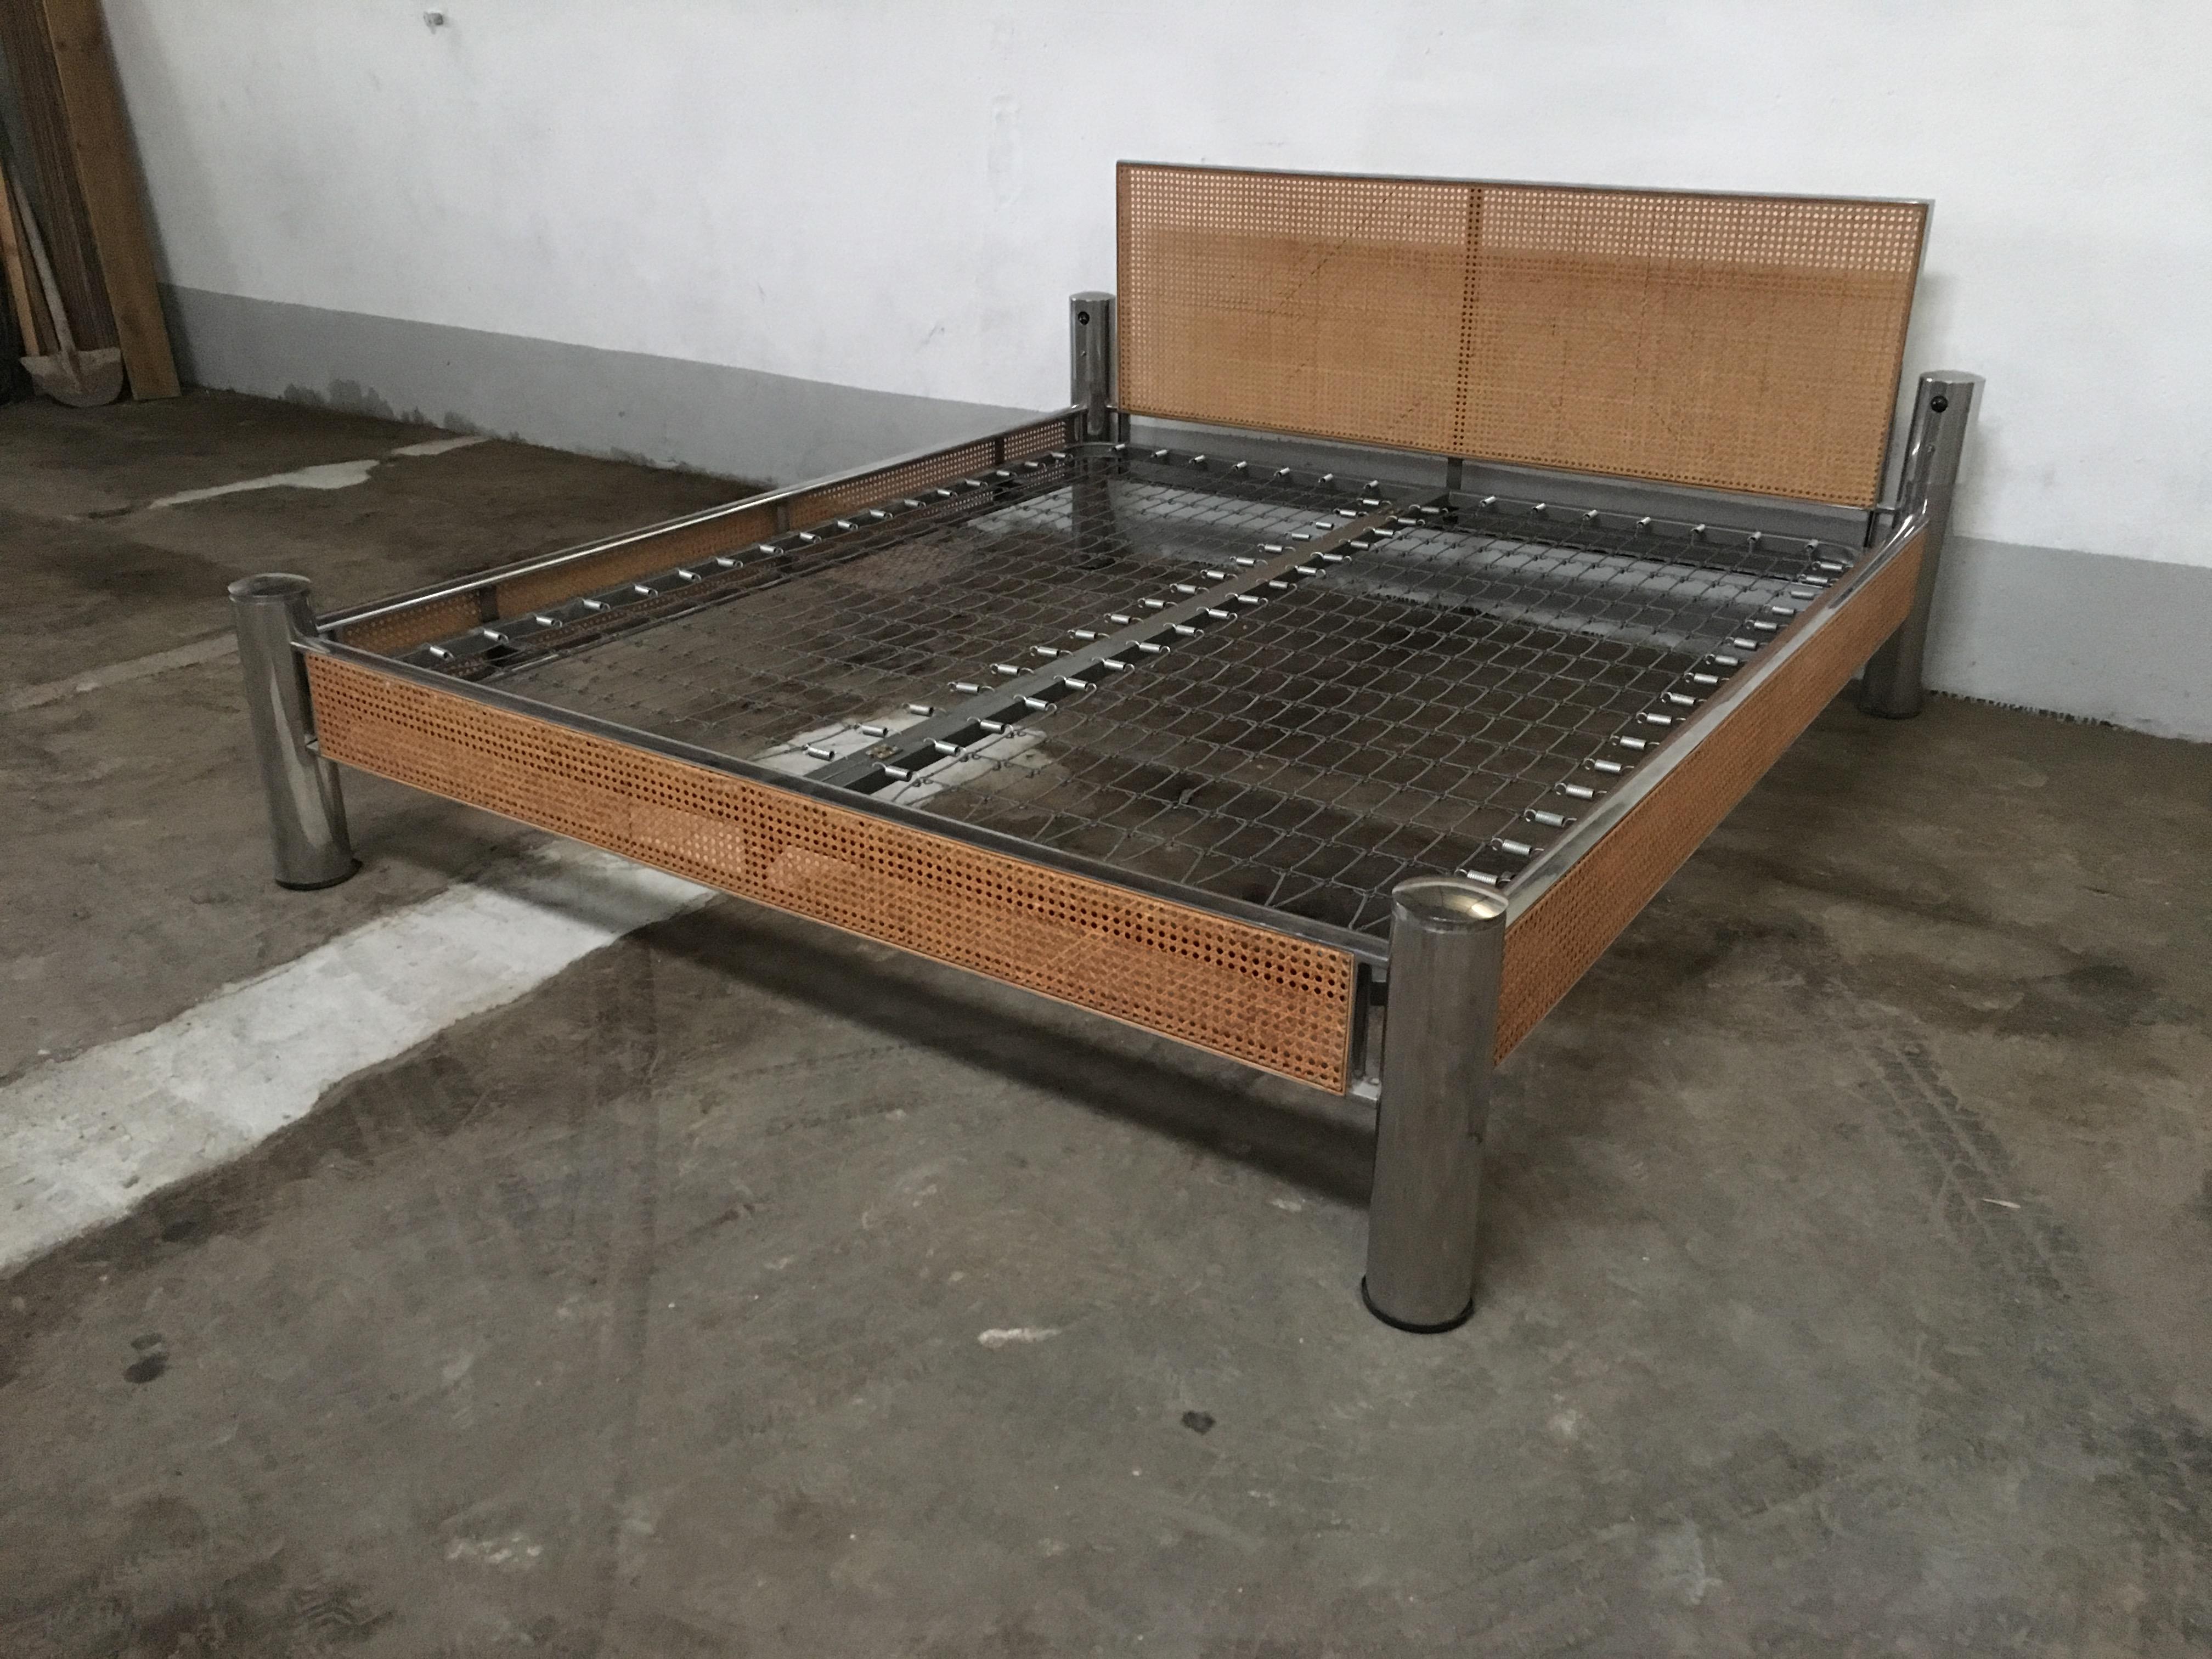 Mid-Century Modern Italian chrome bed with Vienna straw and lights, 1970s
The bed needs a mattress of cm.170 x 200.